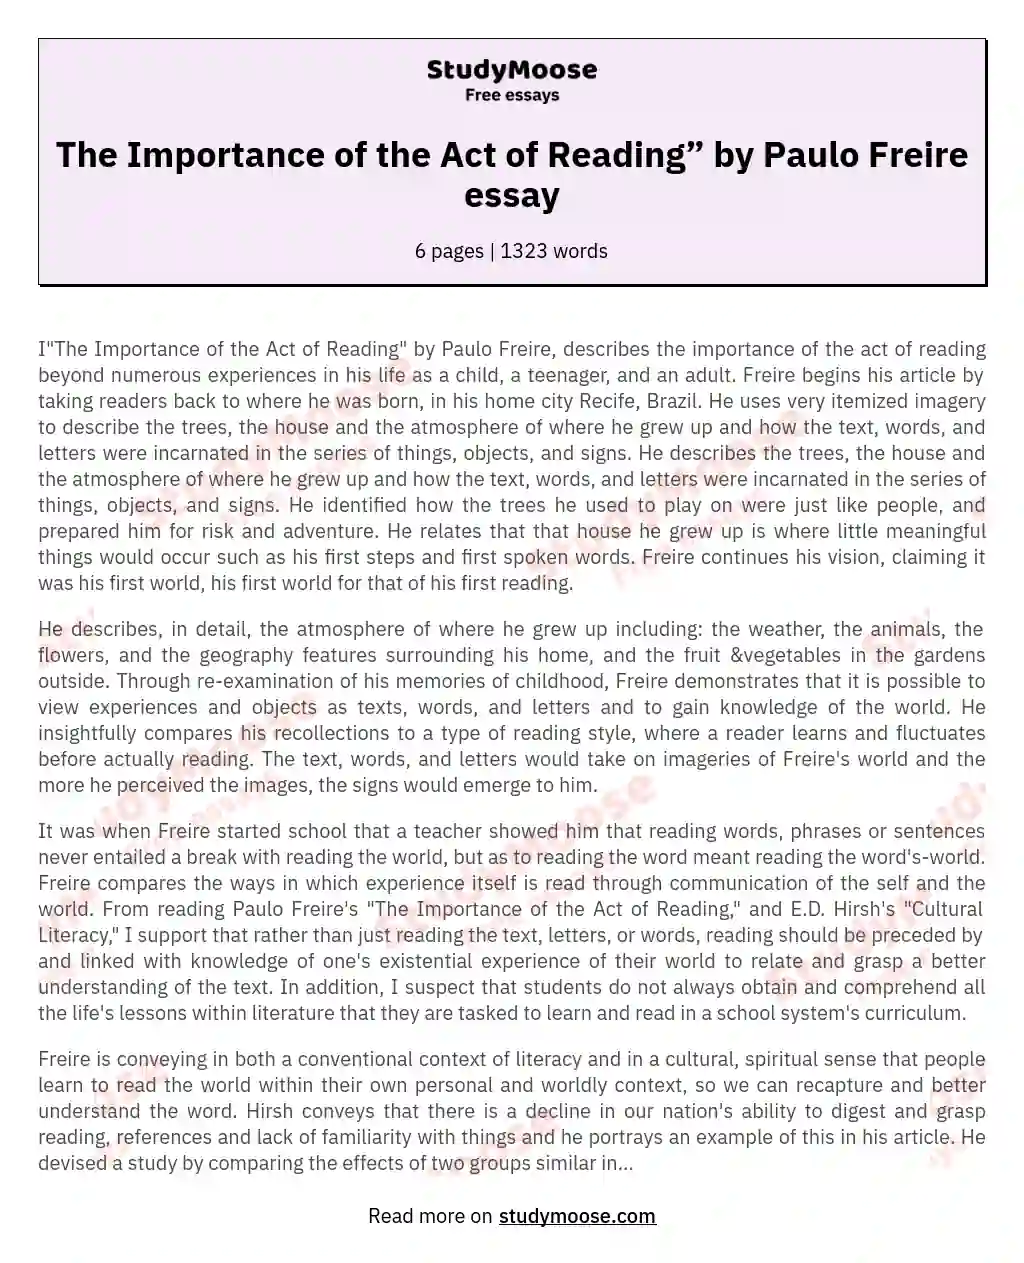 The Importance of the Act of Reading” by Paulo Freire essay